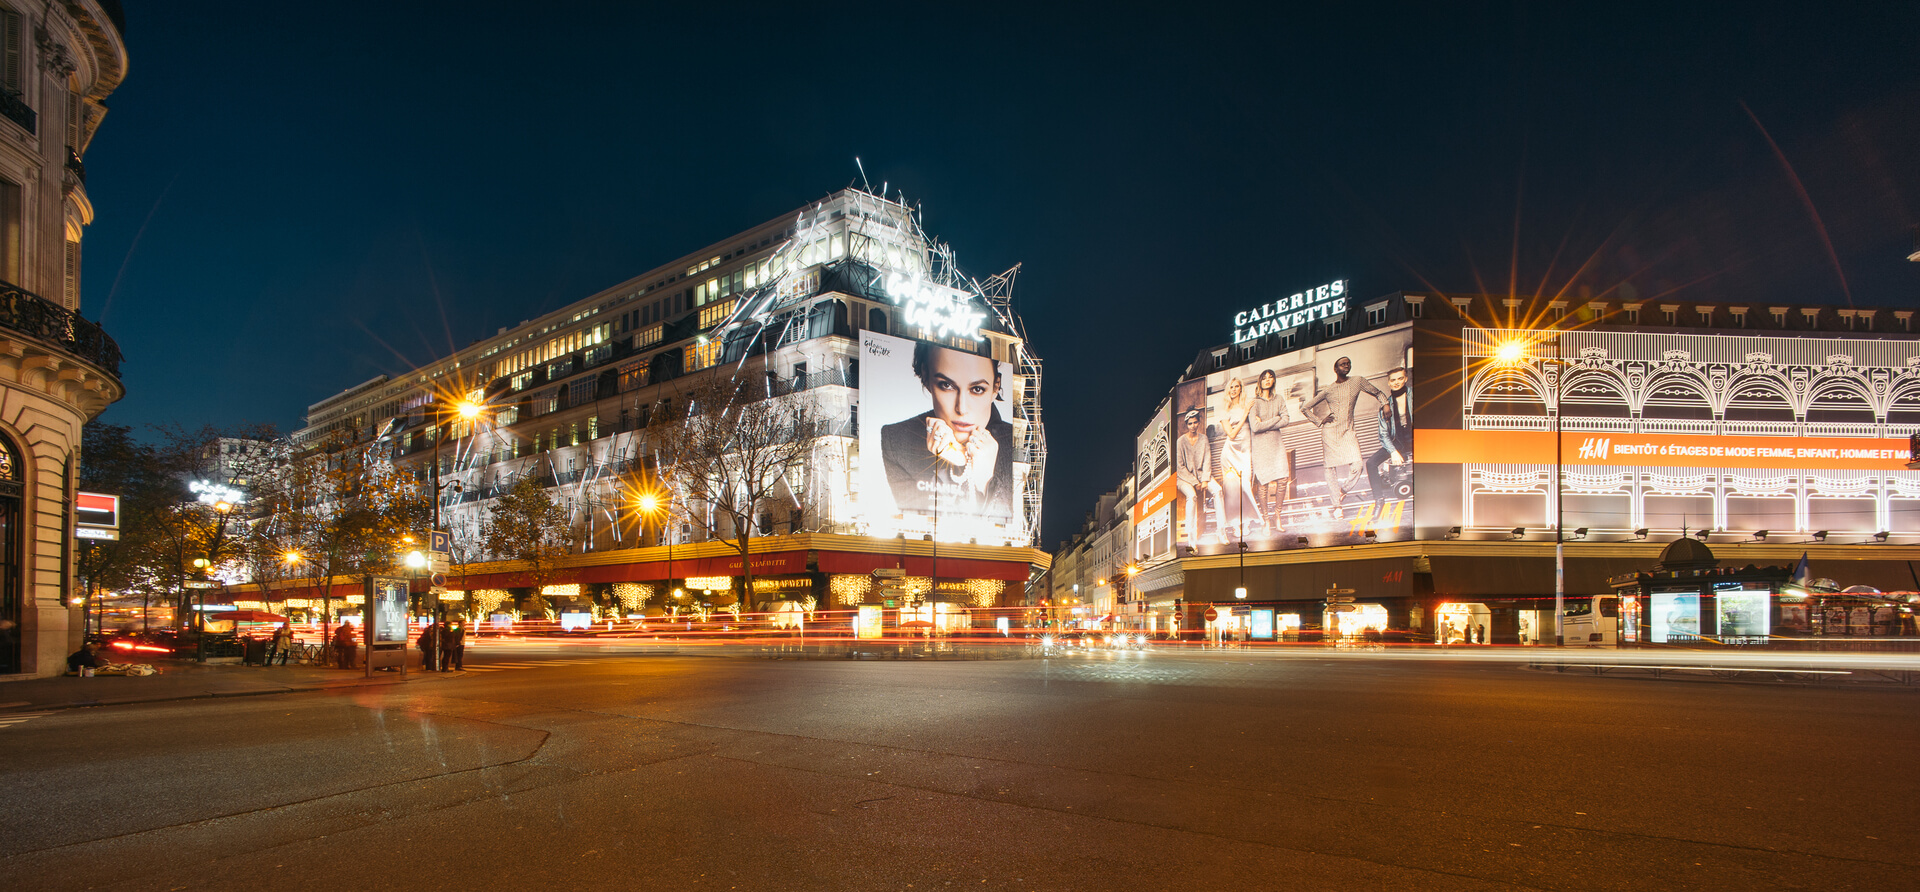 Night view of Galleries Lafayette and The Haussmann Boulevard. The Galeries Lafayette is an upmarket French department store chain